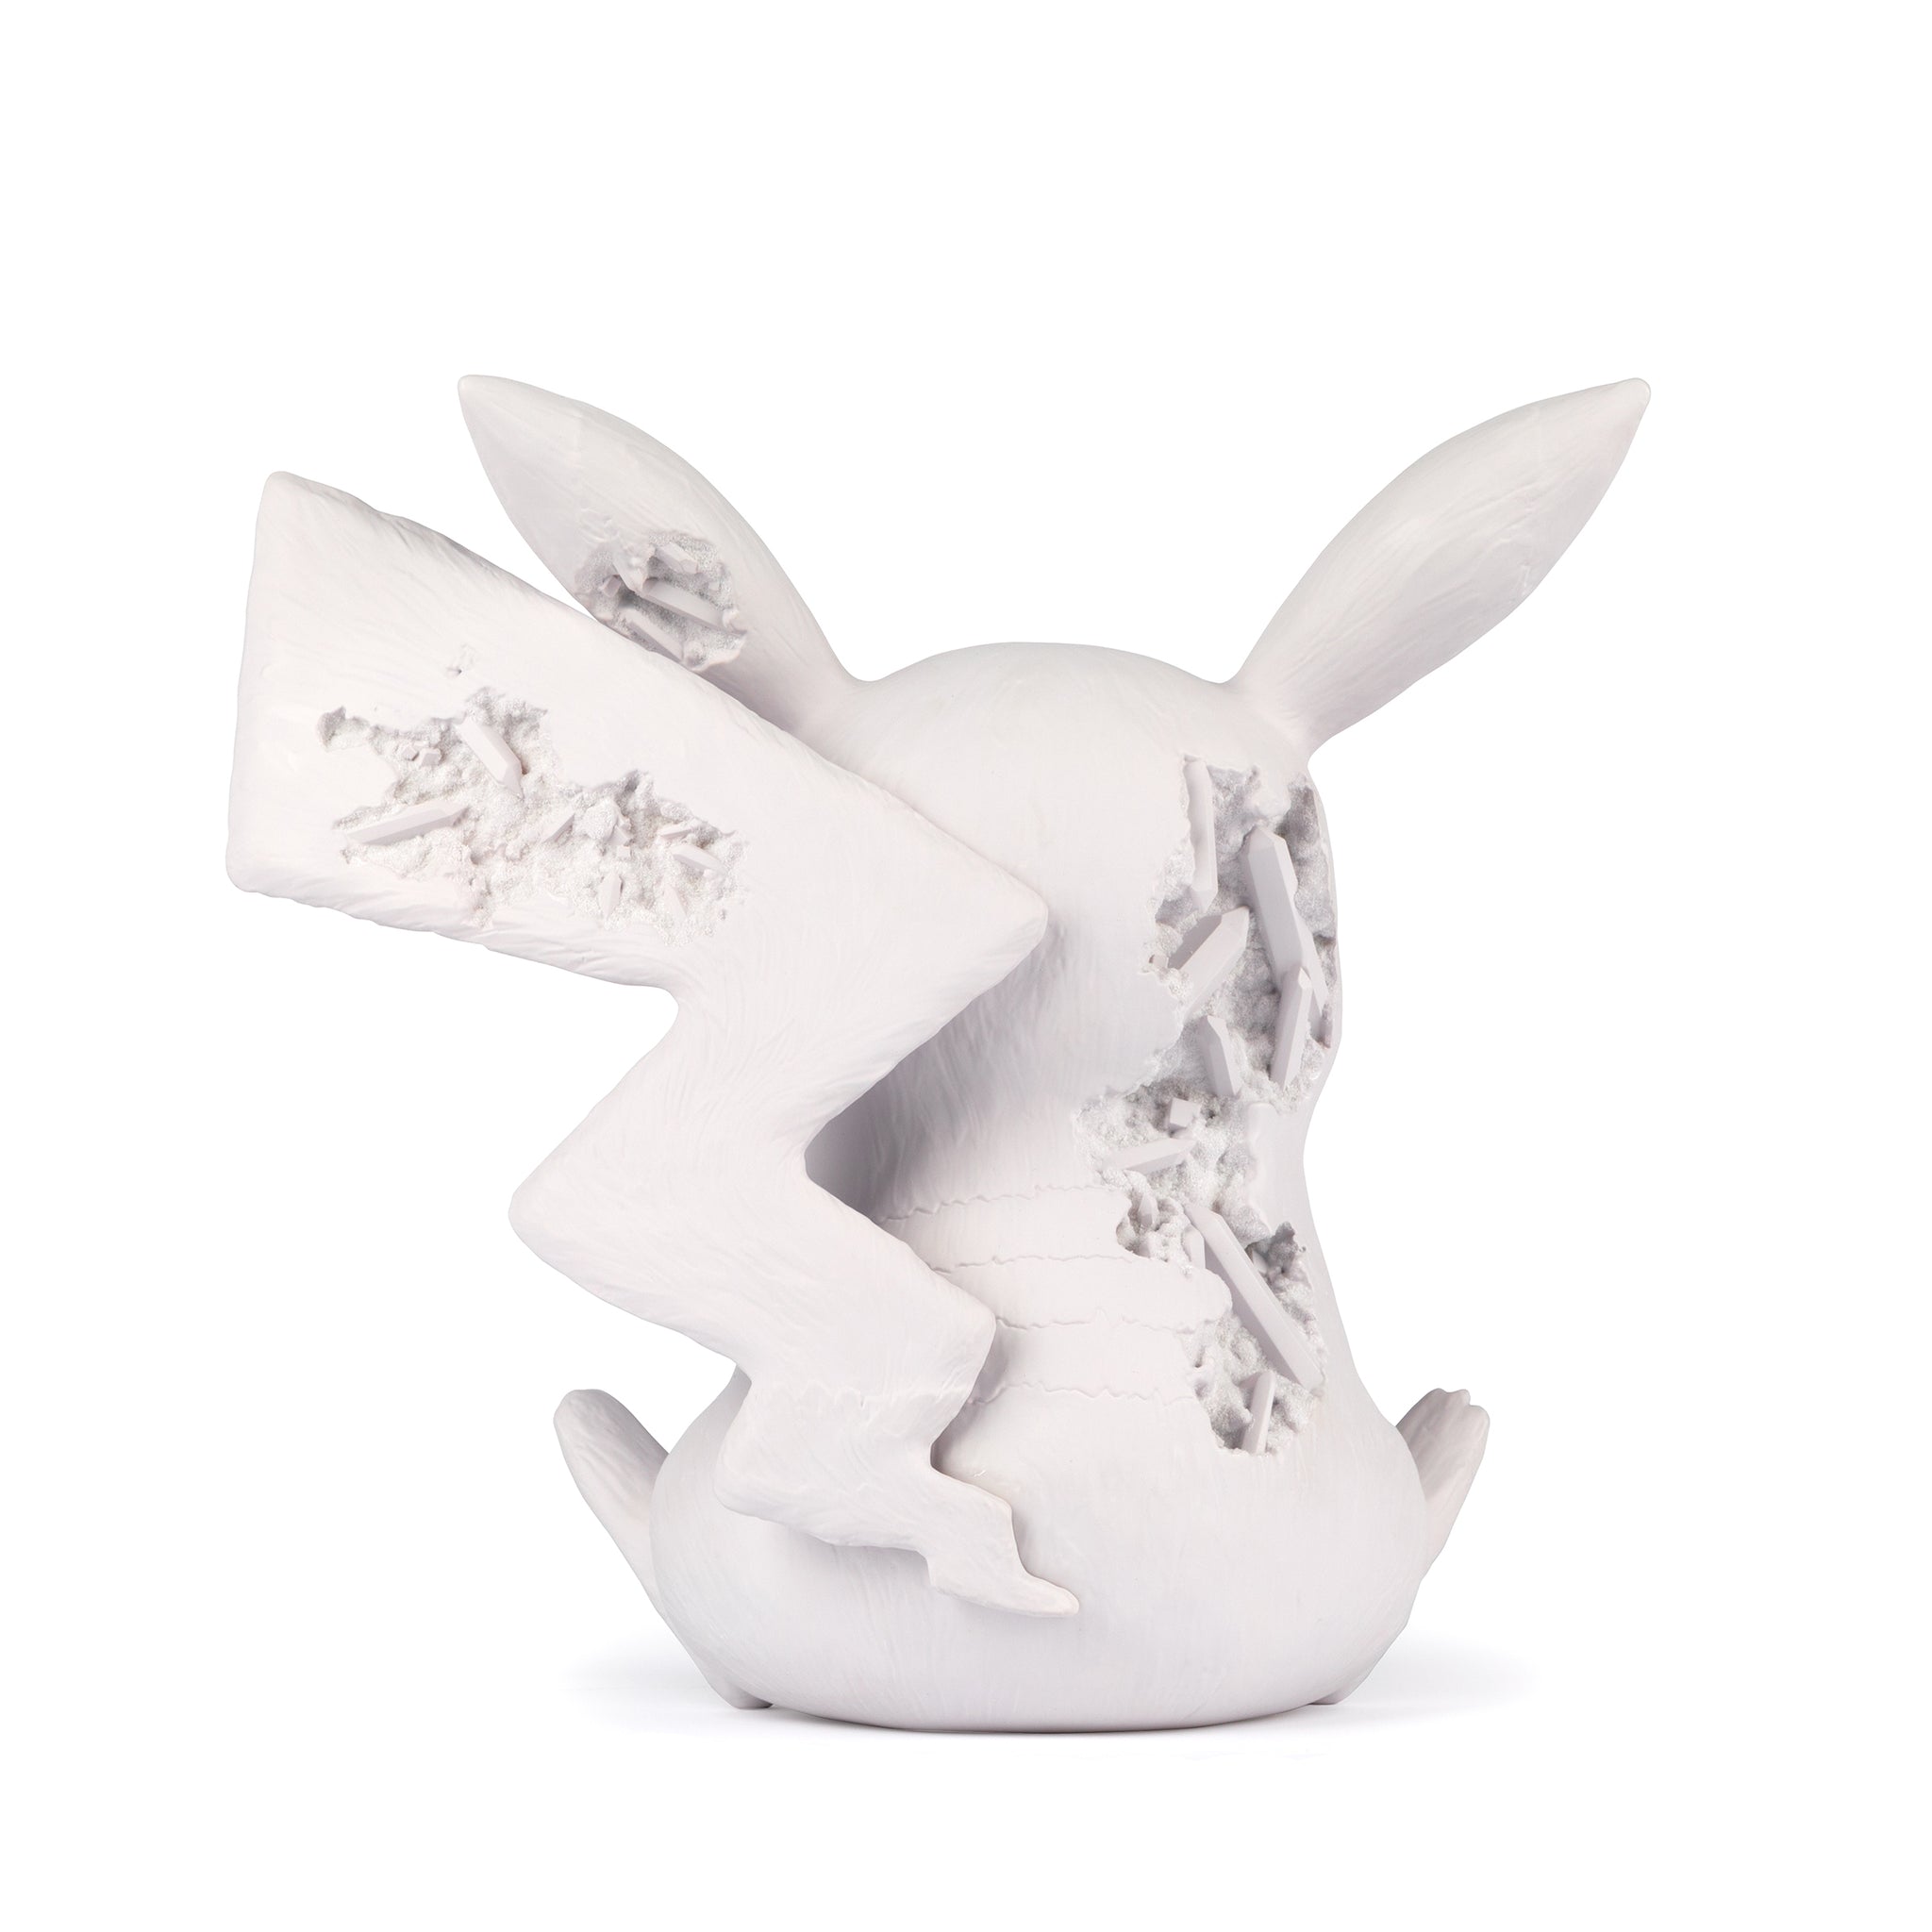 Crystalized Seated Pikachu